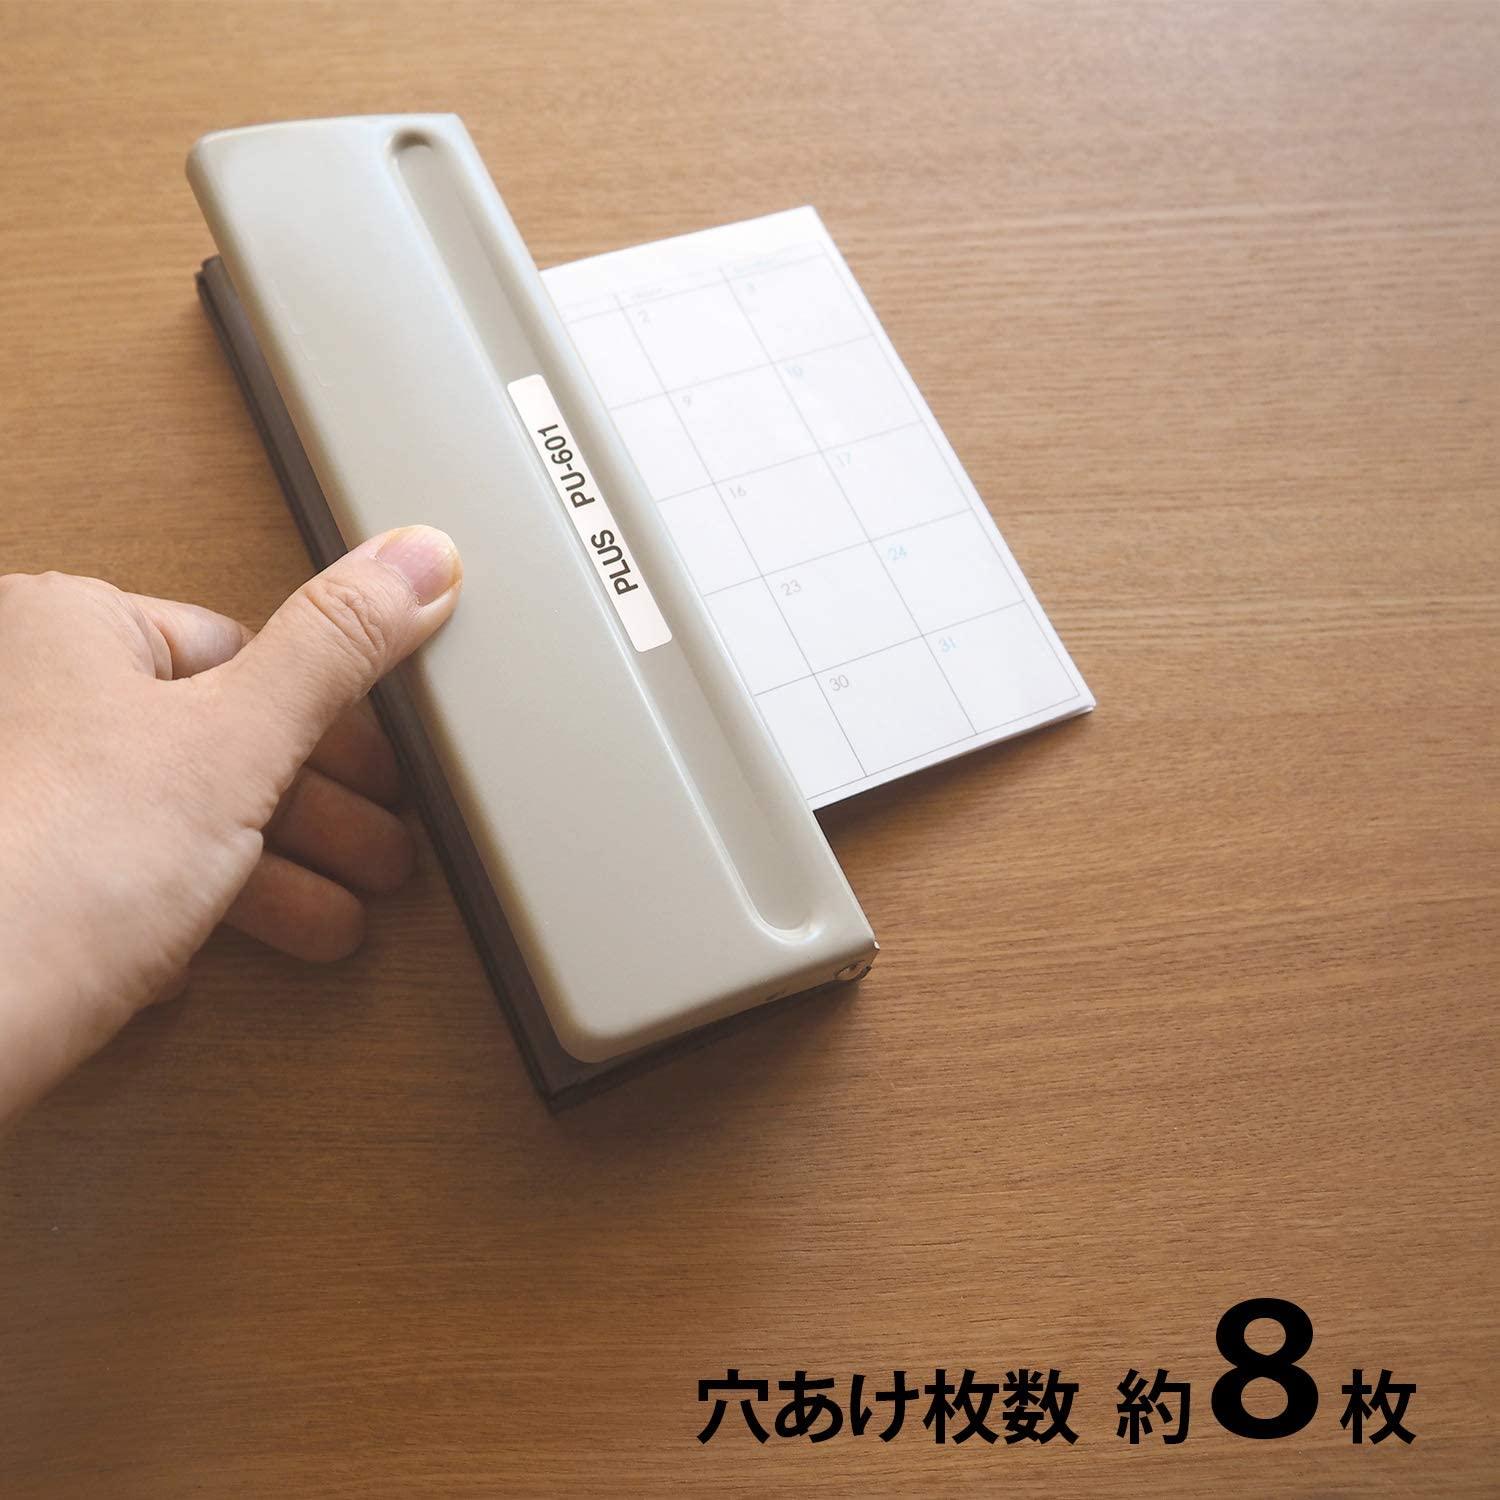 Plus Punch PU-601 Notebook - 6 Hole Punch for Easy Organization - Pre-Order  NOW! – CHL-STORE